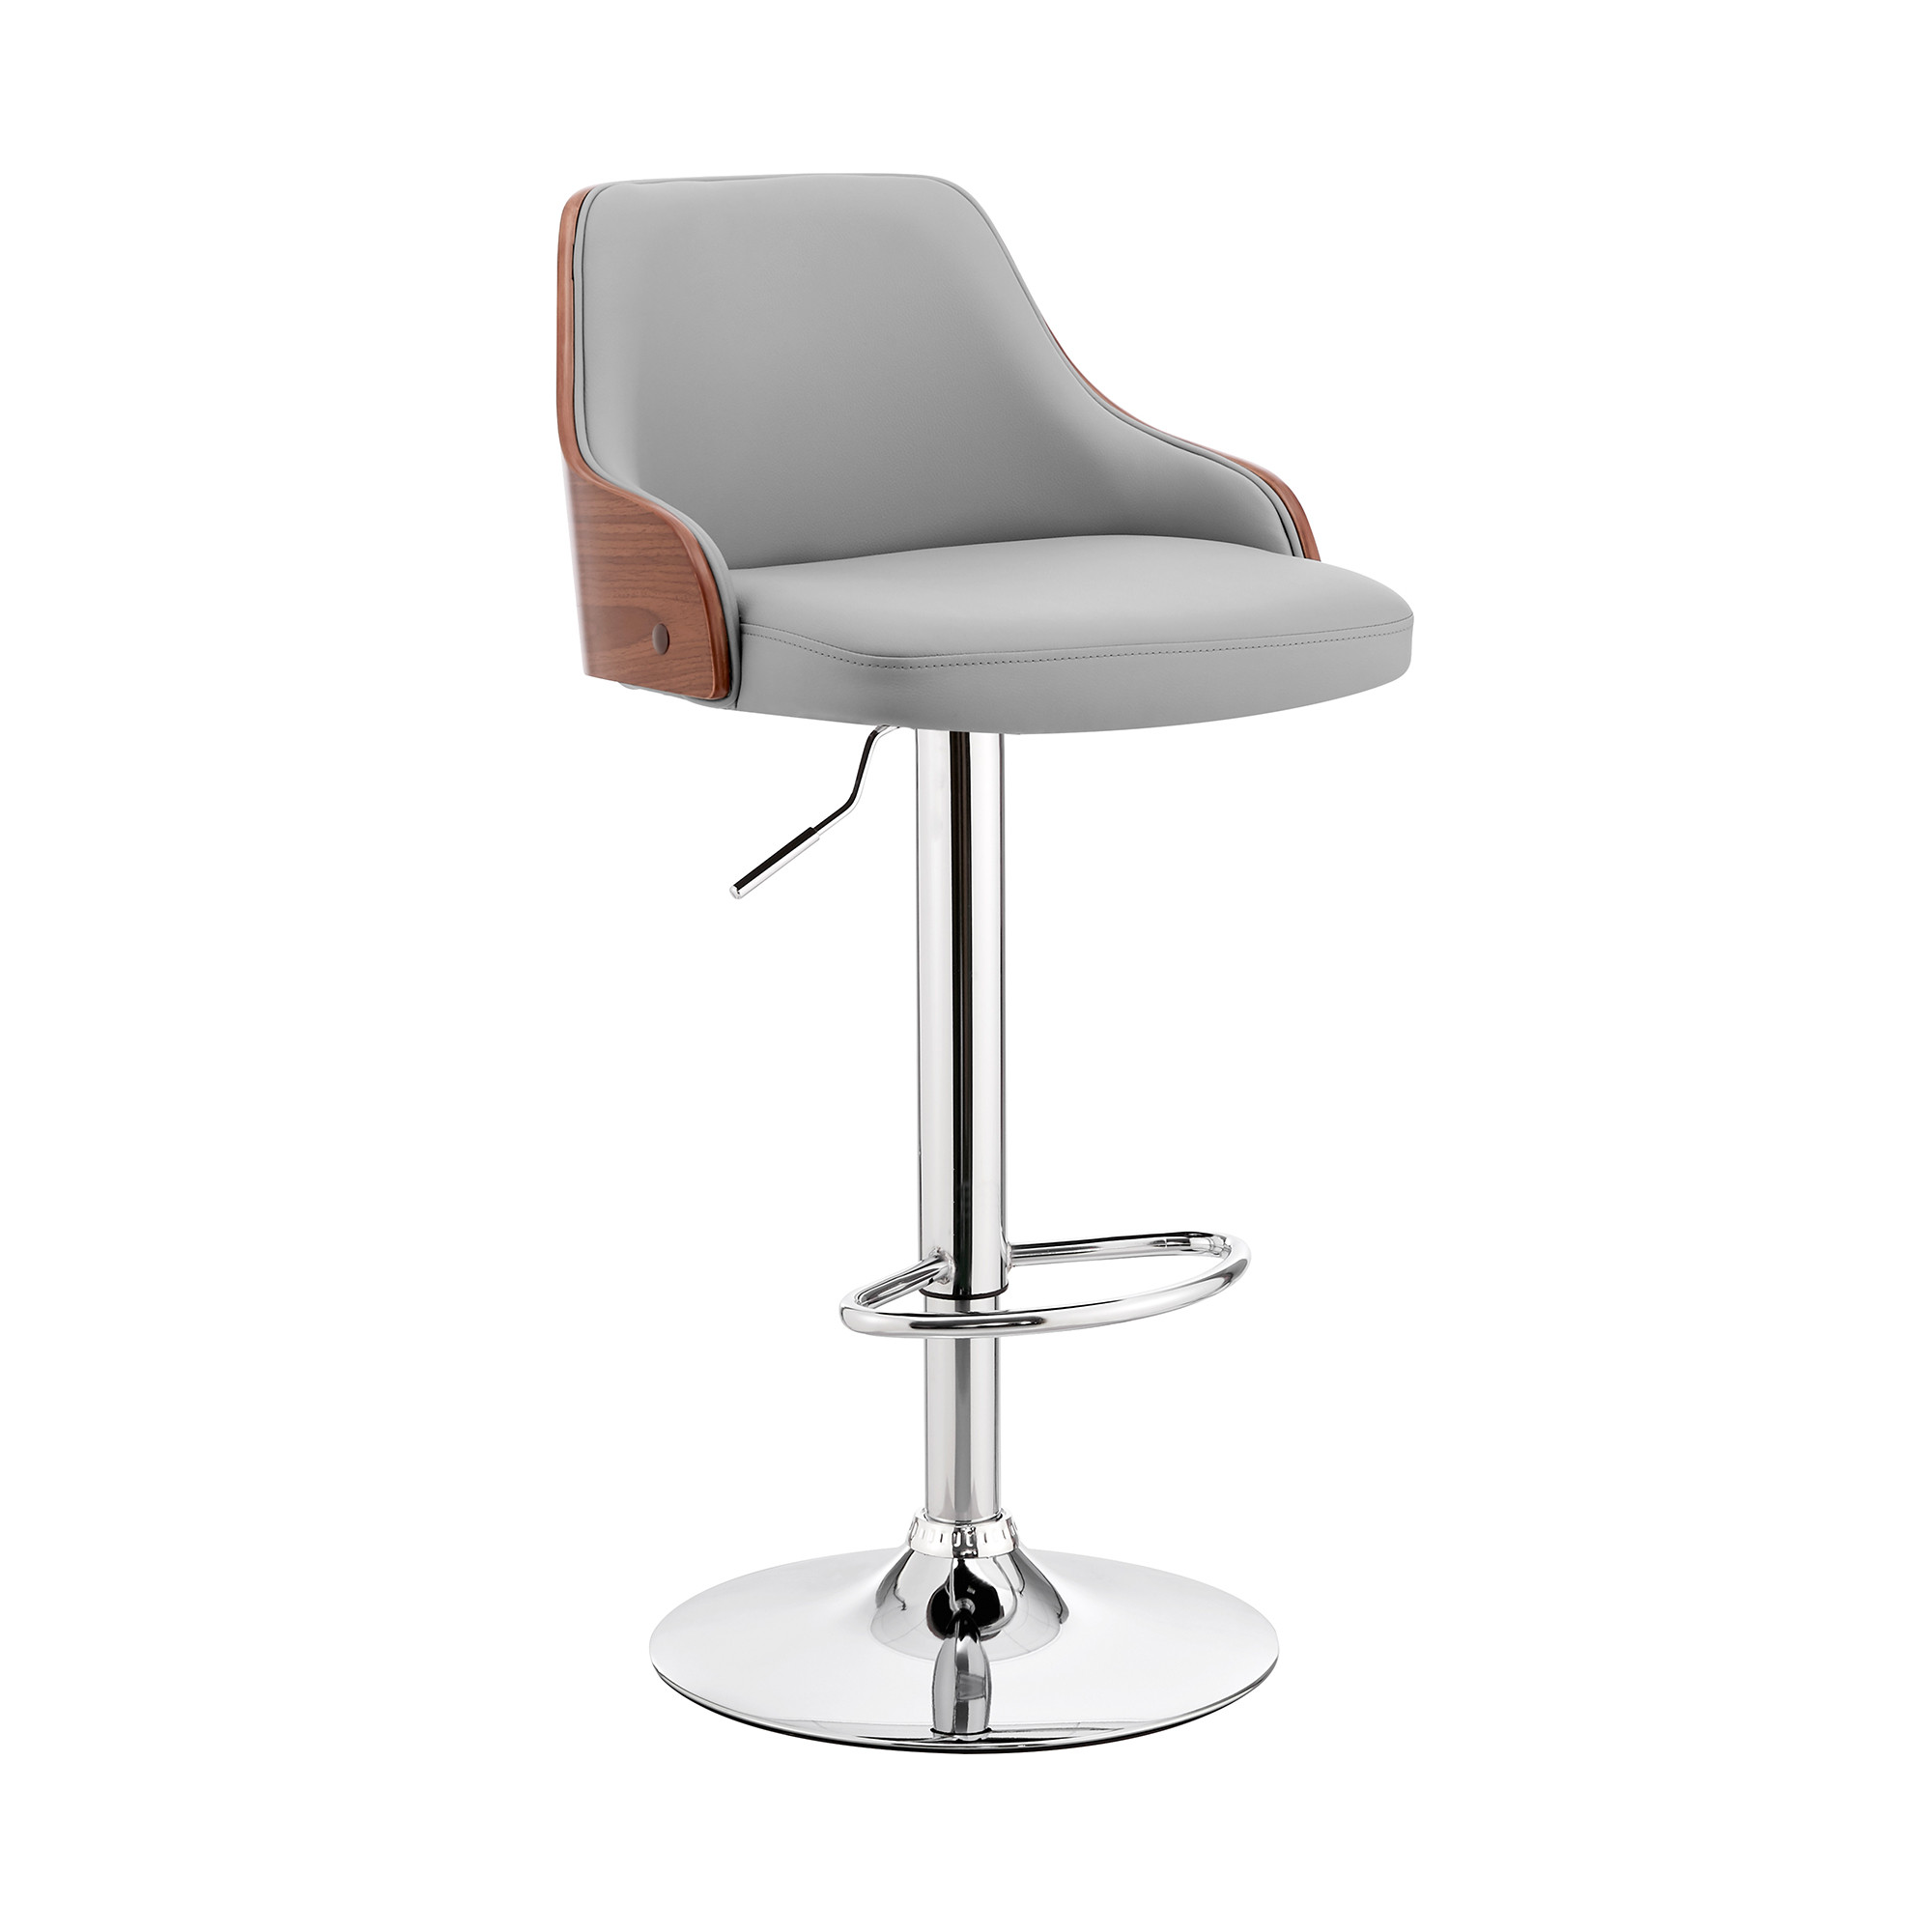 Gray Faux Leather Adjustable Modern Bar Stool